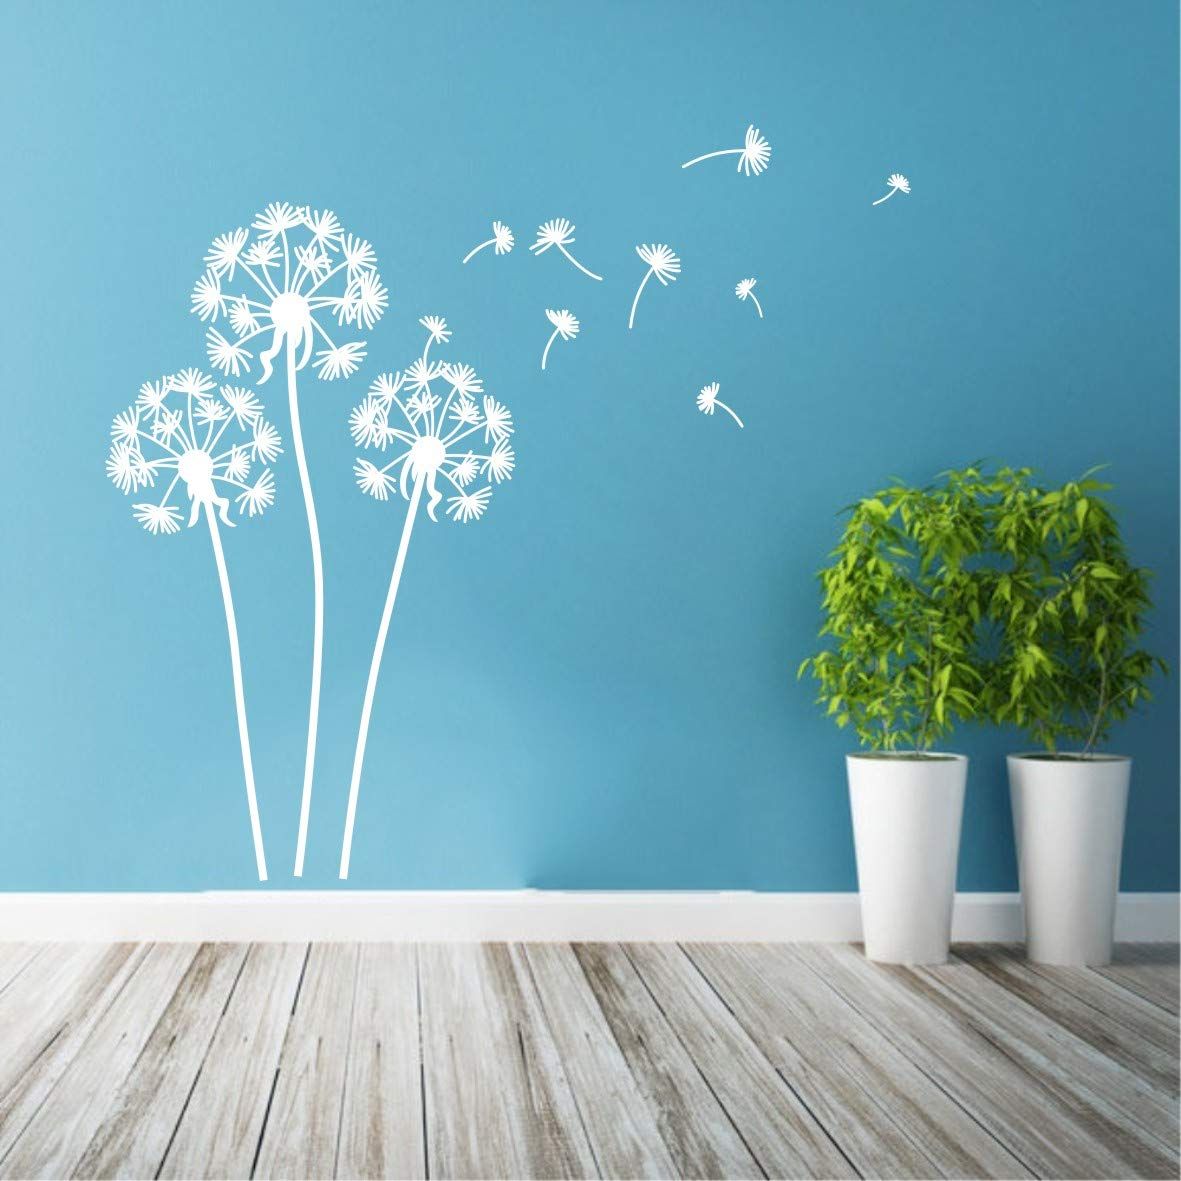 Wall Decal Flying Dandelion Plant Vinyl Wall Stickers Home Living Room Decor  Kids Nursery Room Removable For Flying Dandelion Wall Art (View 10 of 15)